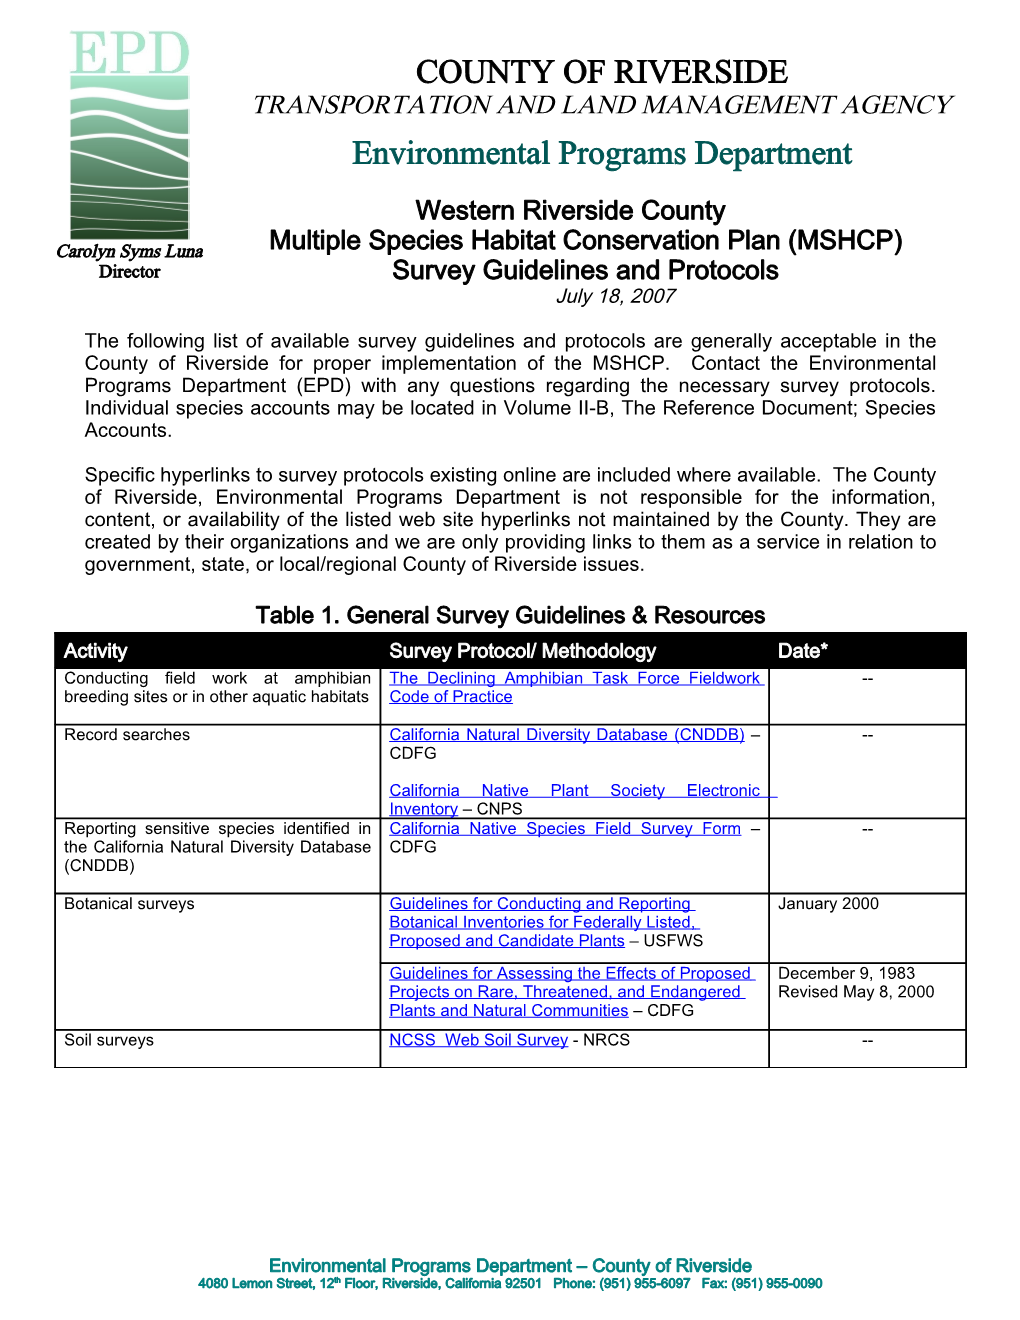 Western Riverside County MSHCP Survey Guidelines & Protocols